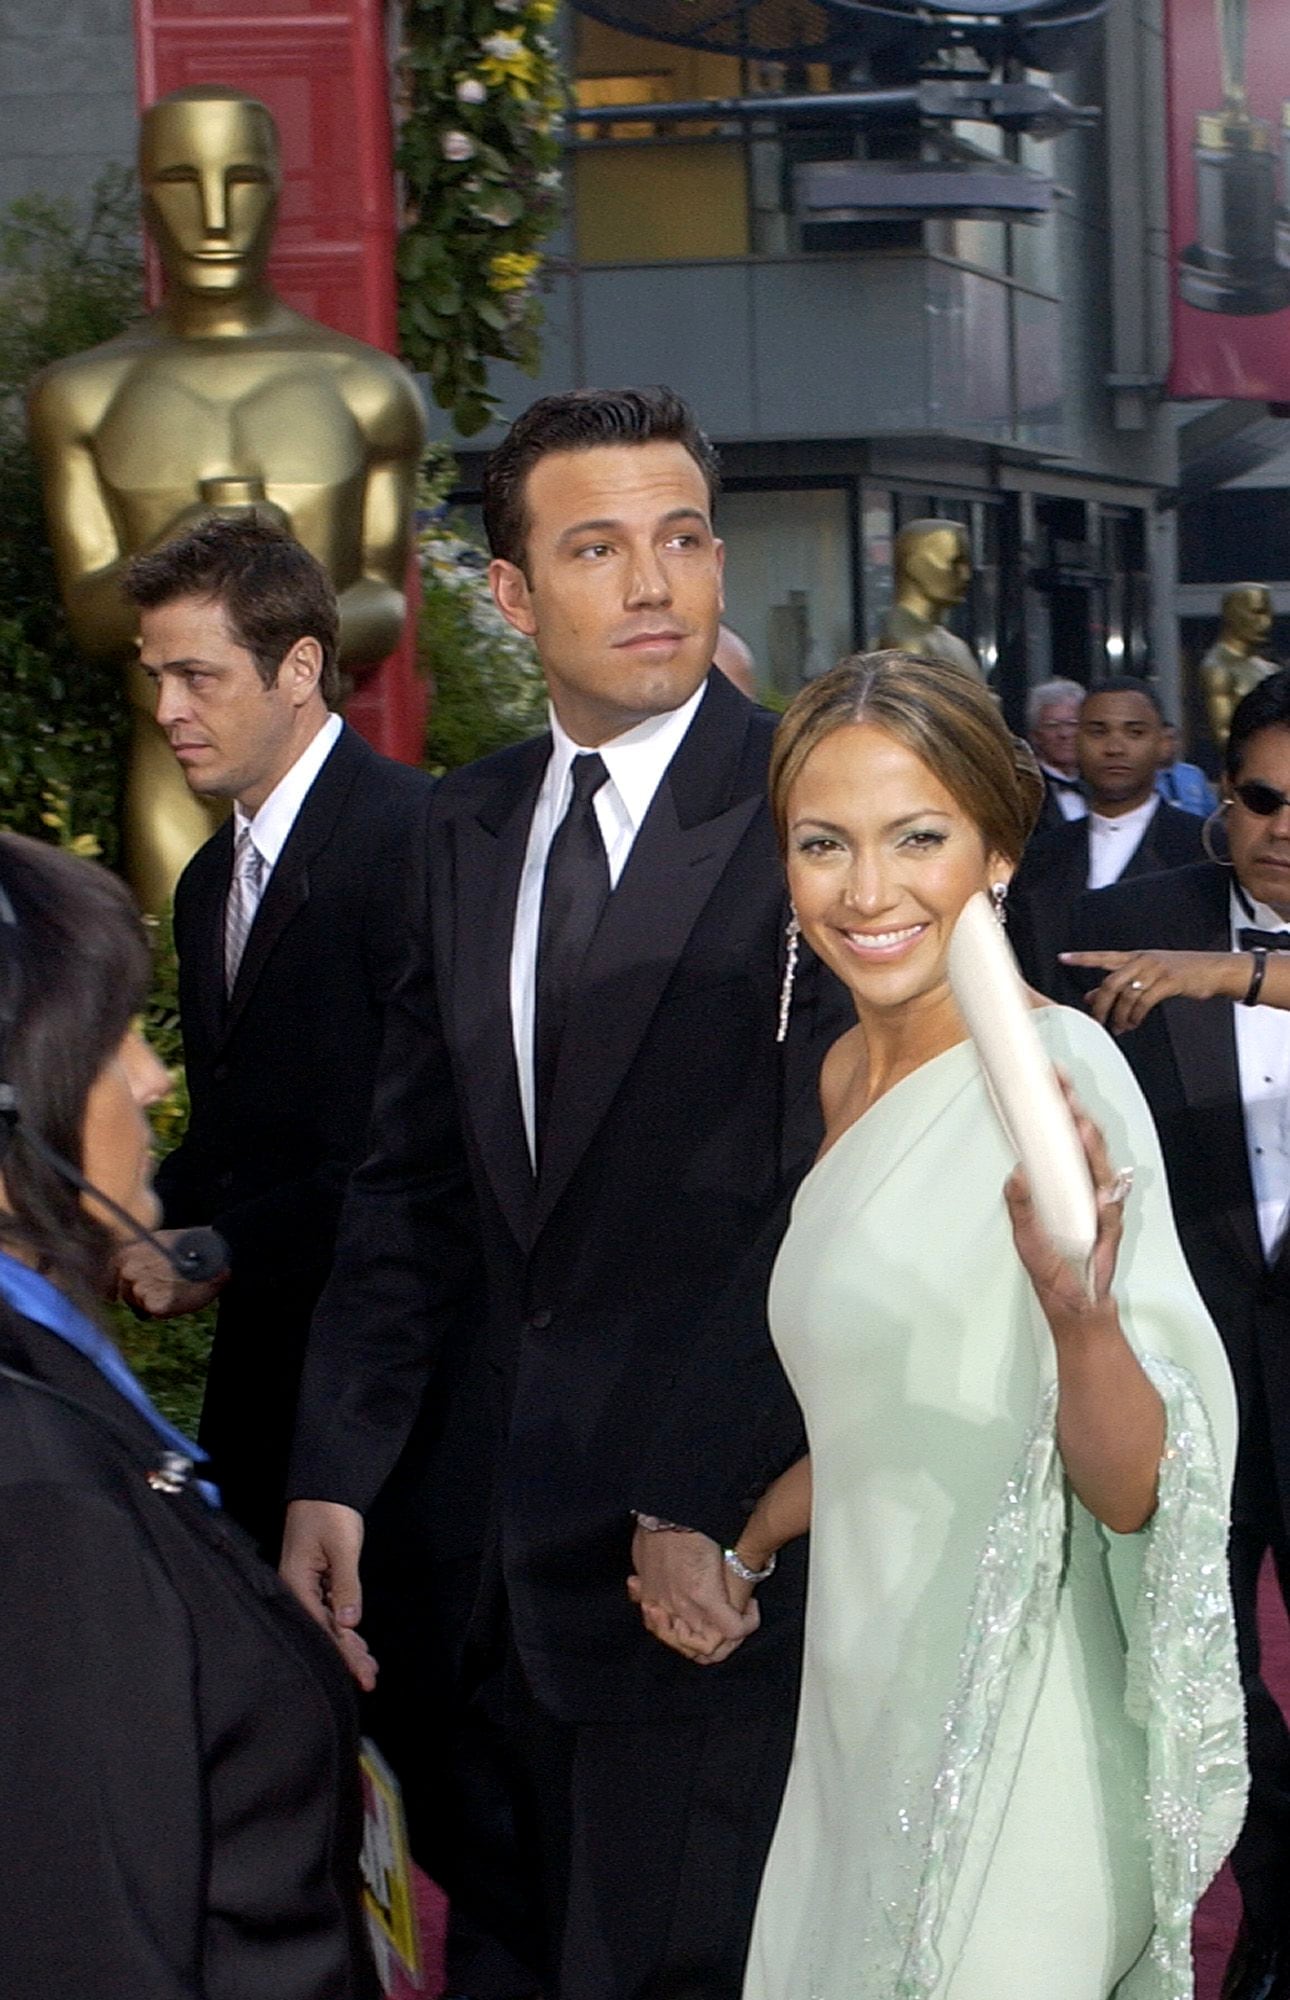 Actors Ben Affleck and his fiancé Jennifer Lopez arrive for the 75th annual Academy Awards Sunday, March 23, 2003, in Los Angeles where they will be presenters during the show. (AP Photo/AMPAS, ho)